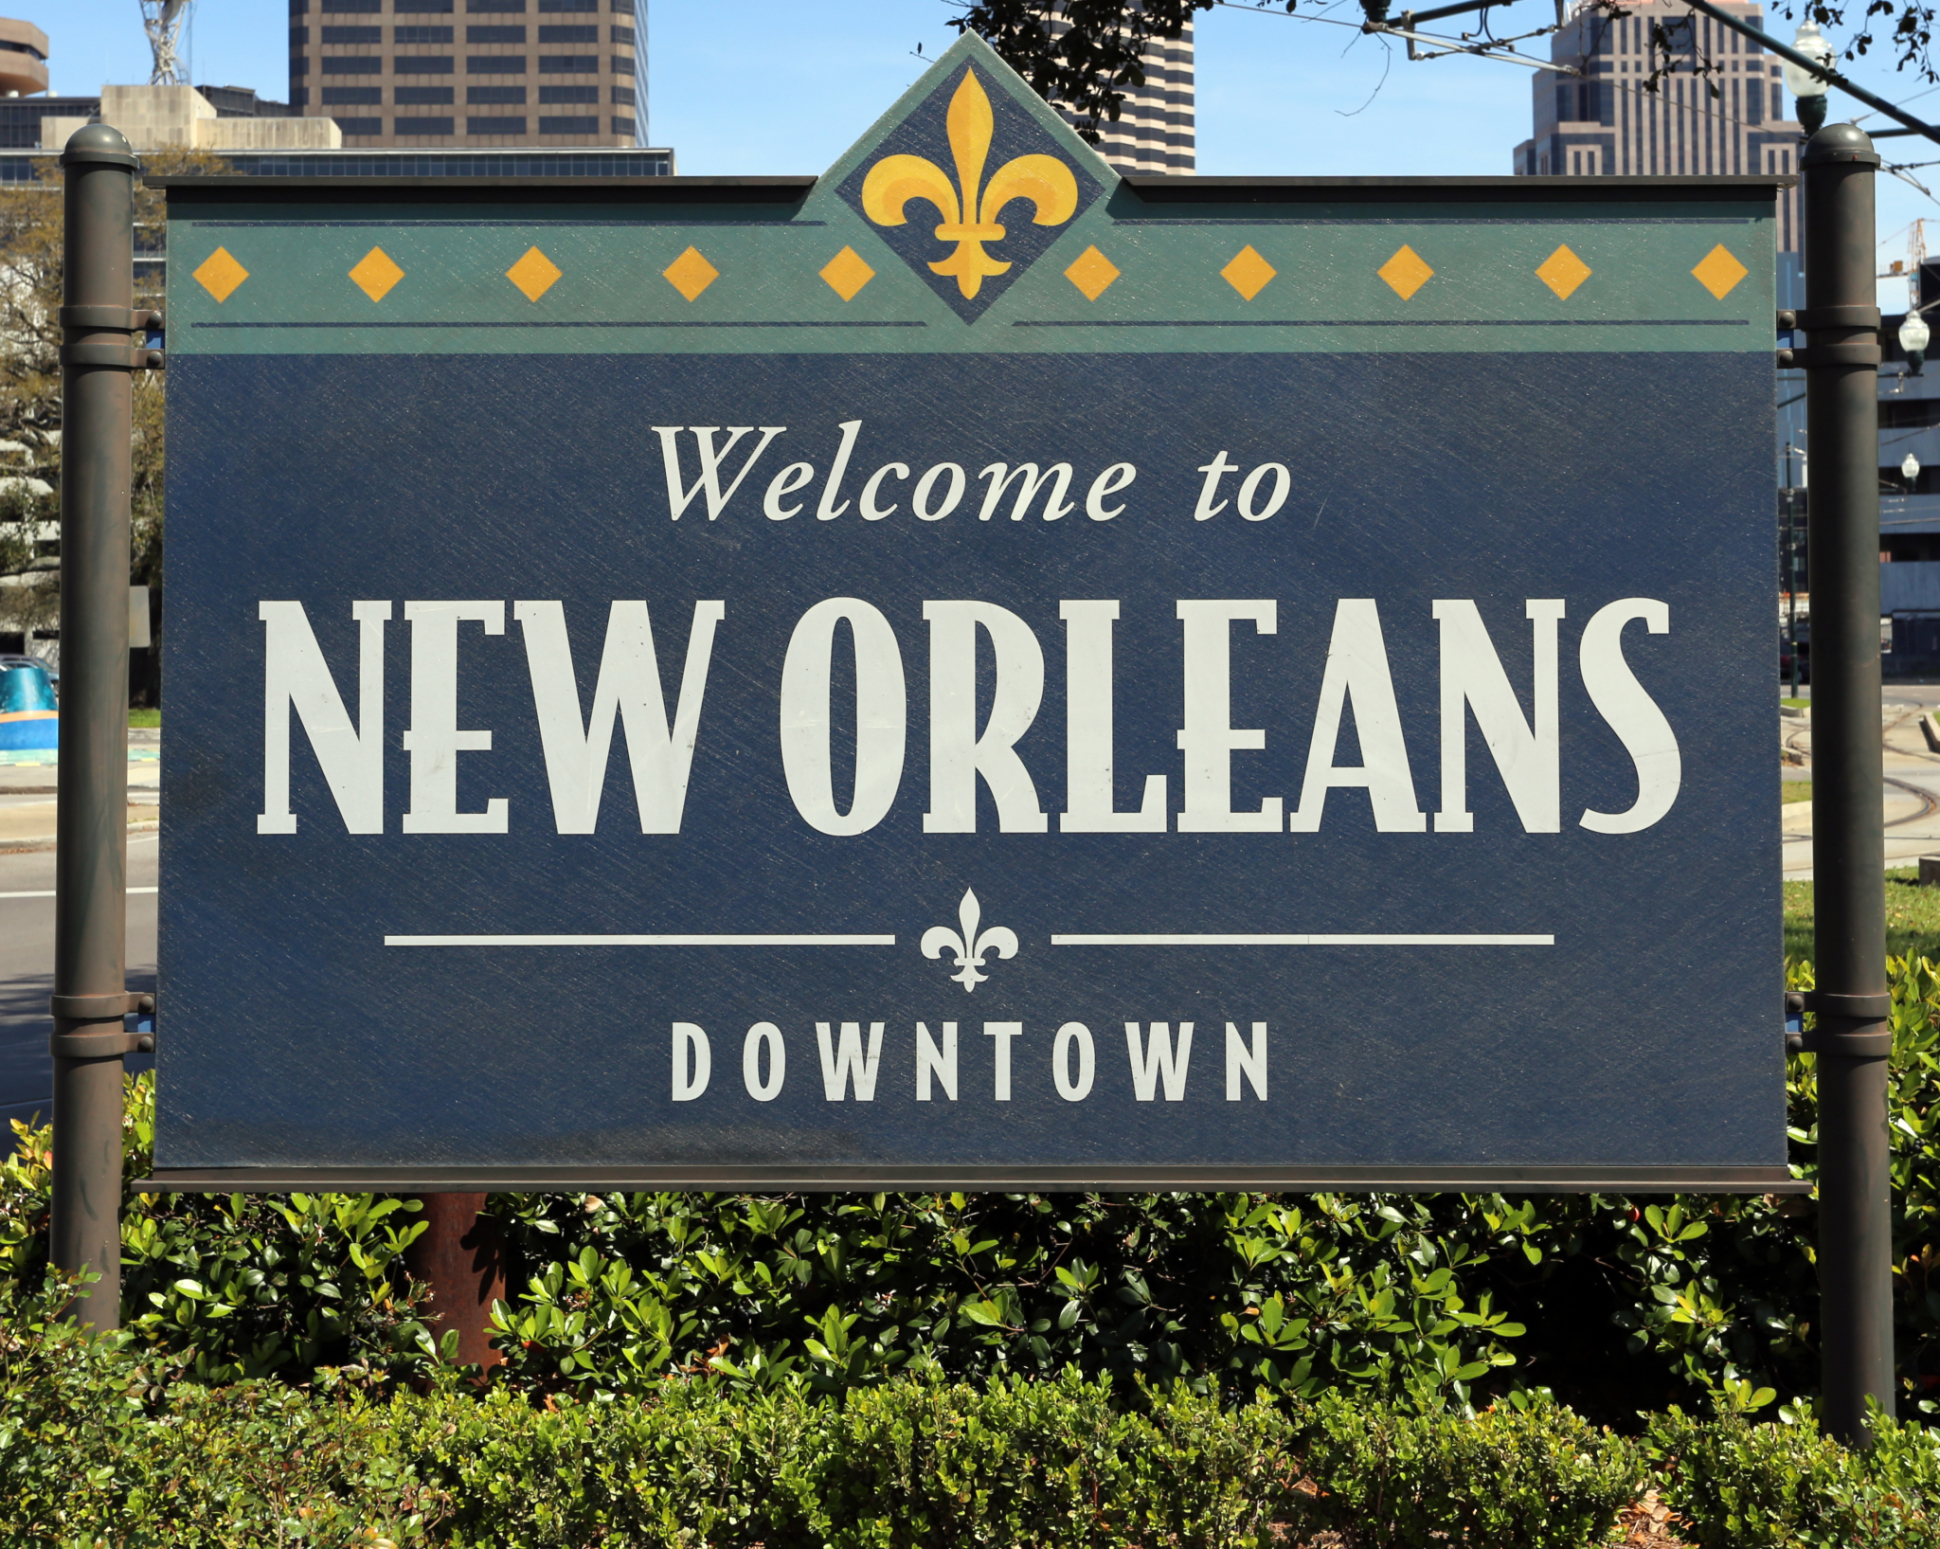 Losing yourself in New Orleans